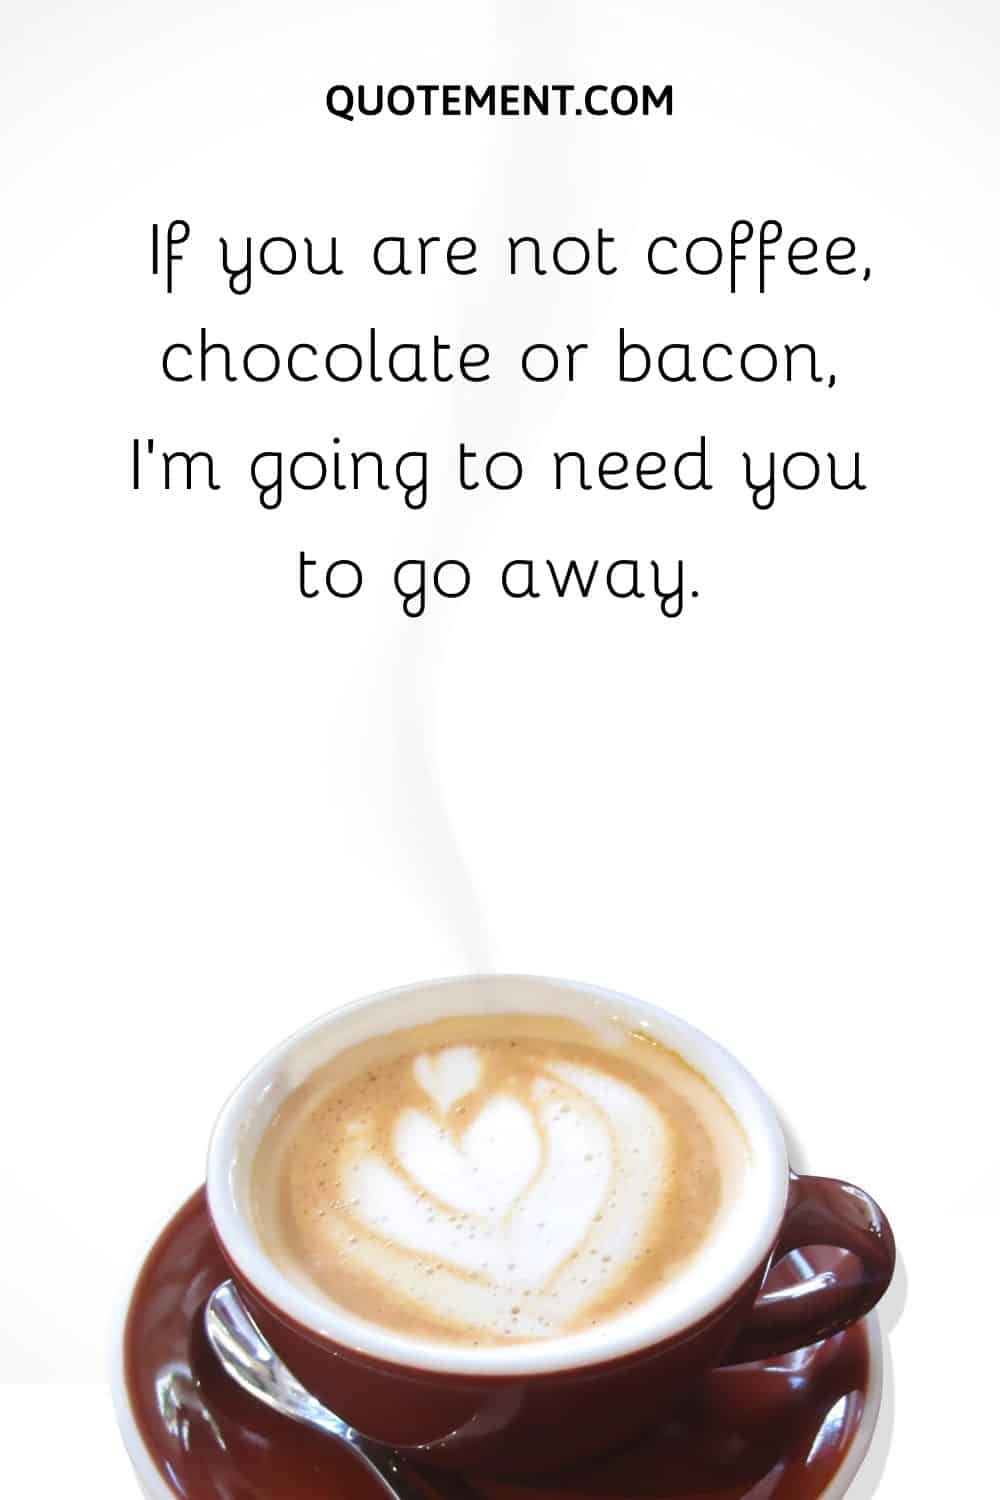 If you are not coffee, chocolate or bacon, I’m going to need you to go away